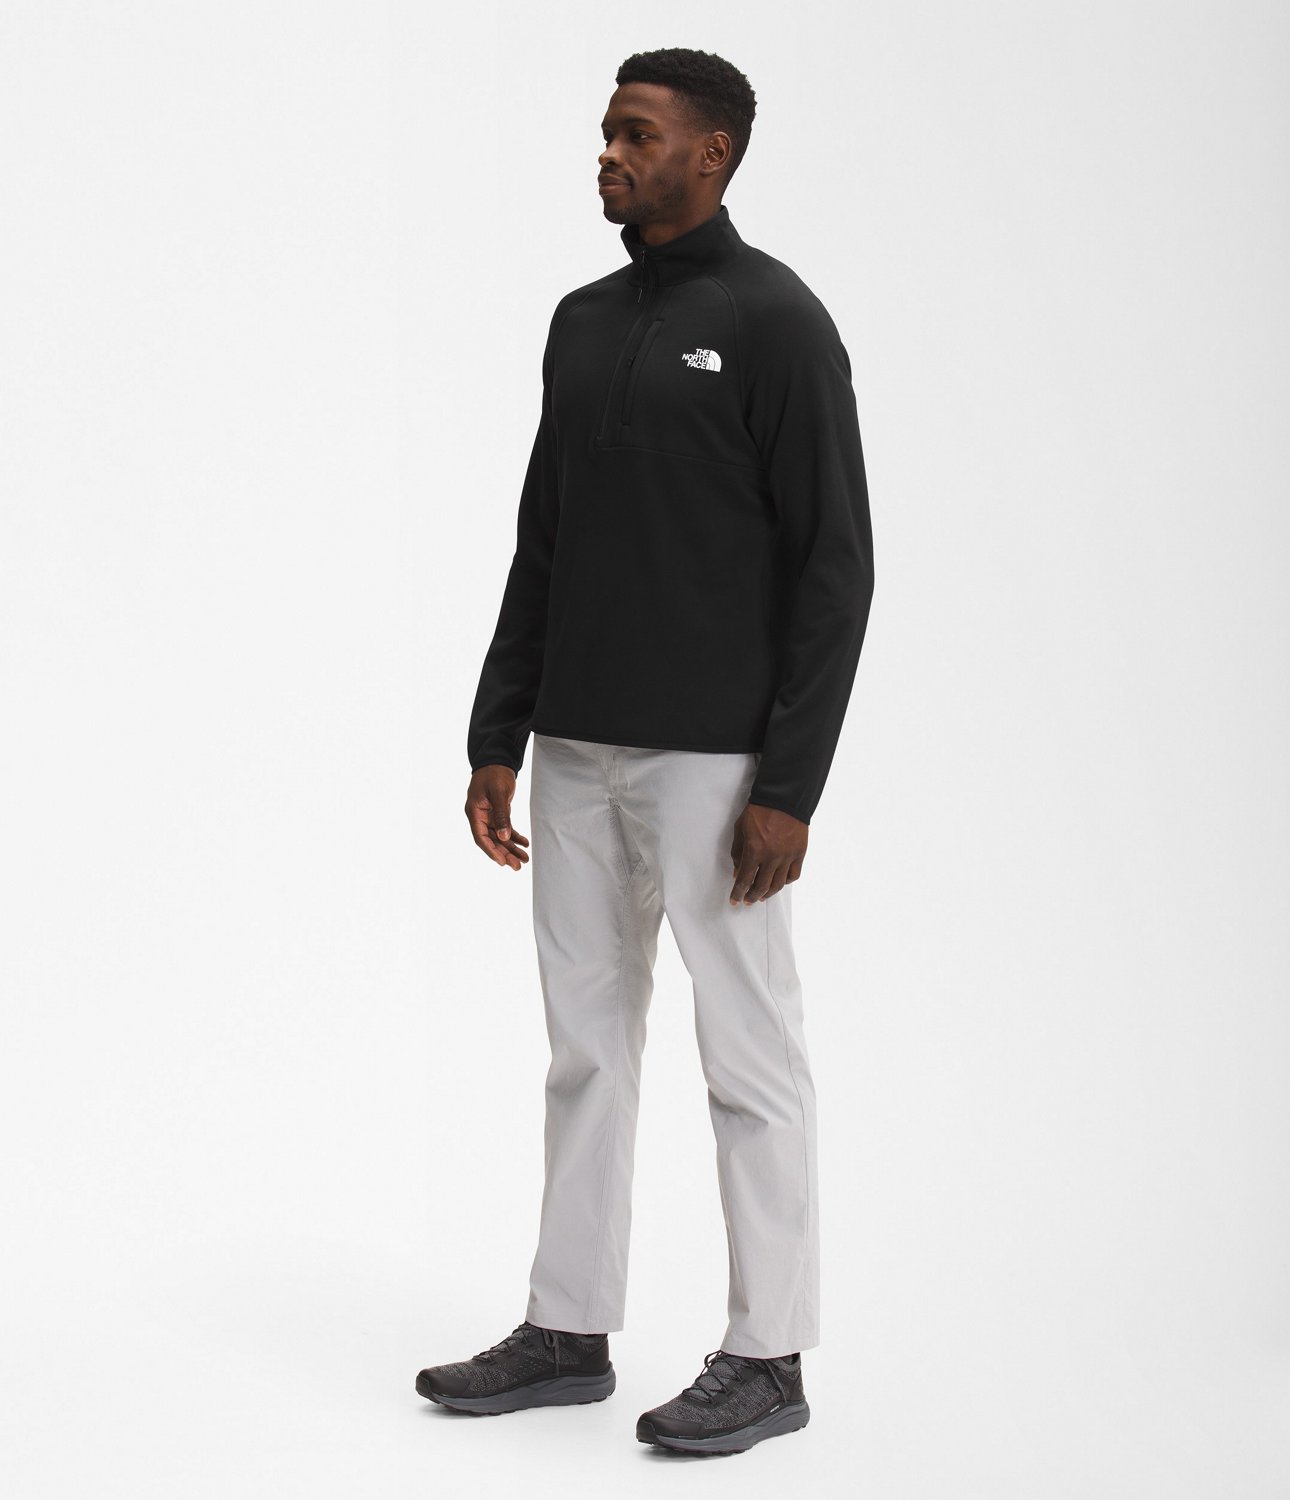 The North Face Men's Canyonlands 1/2 Zip Sweater